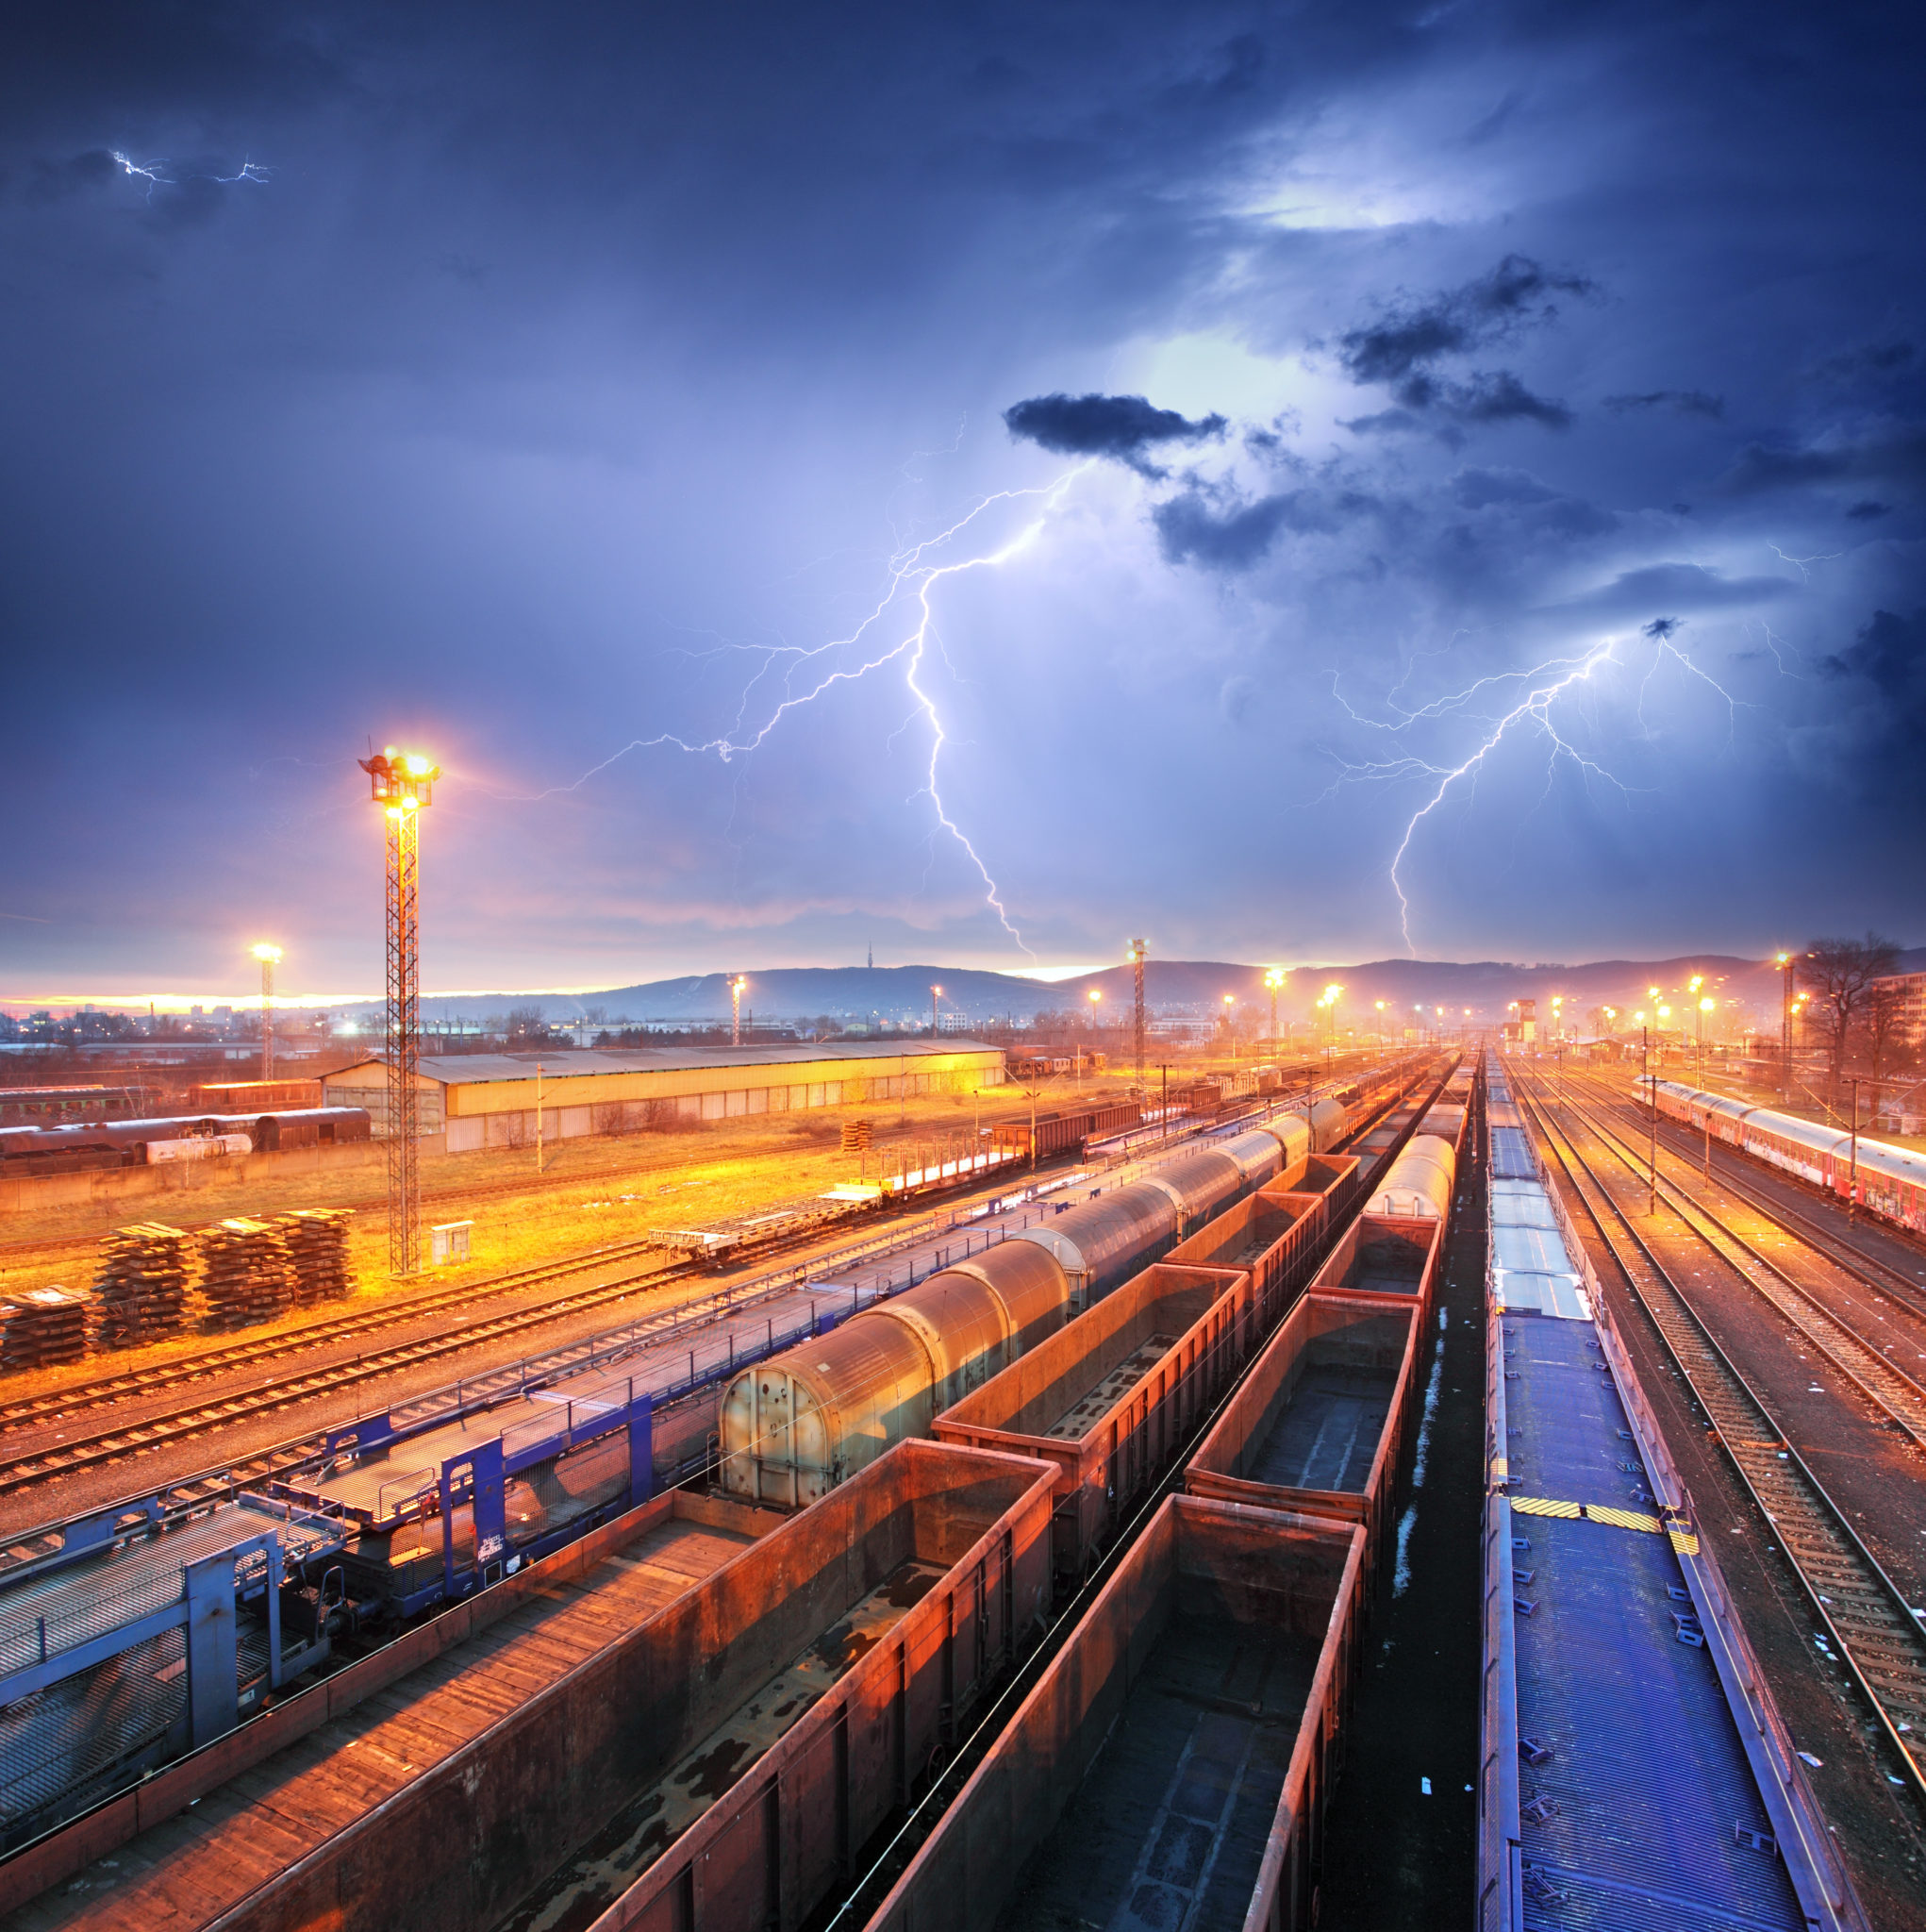 Train freight transportation during a storm